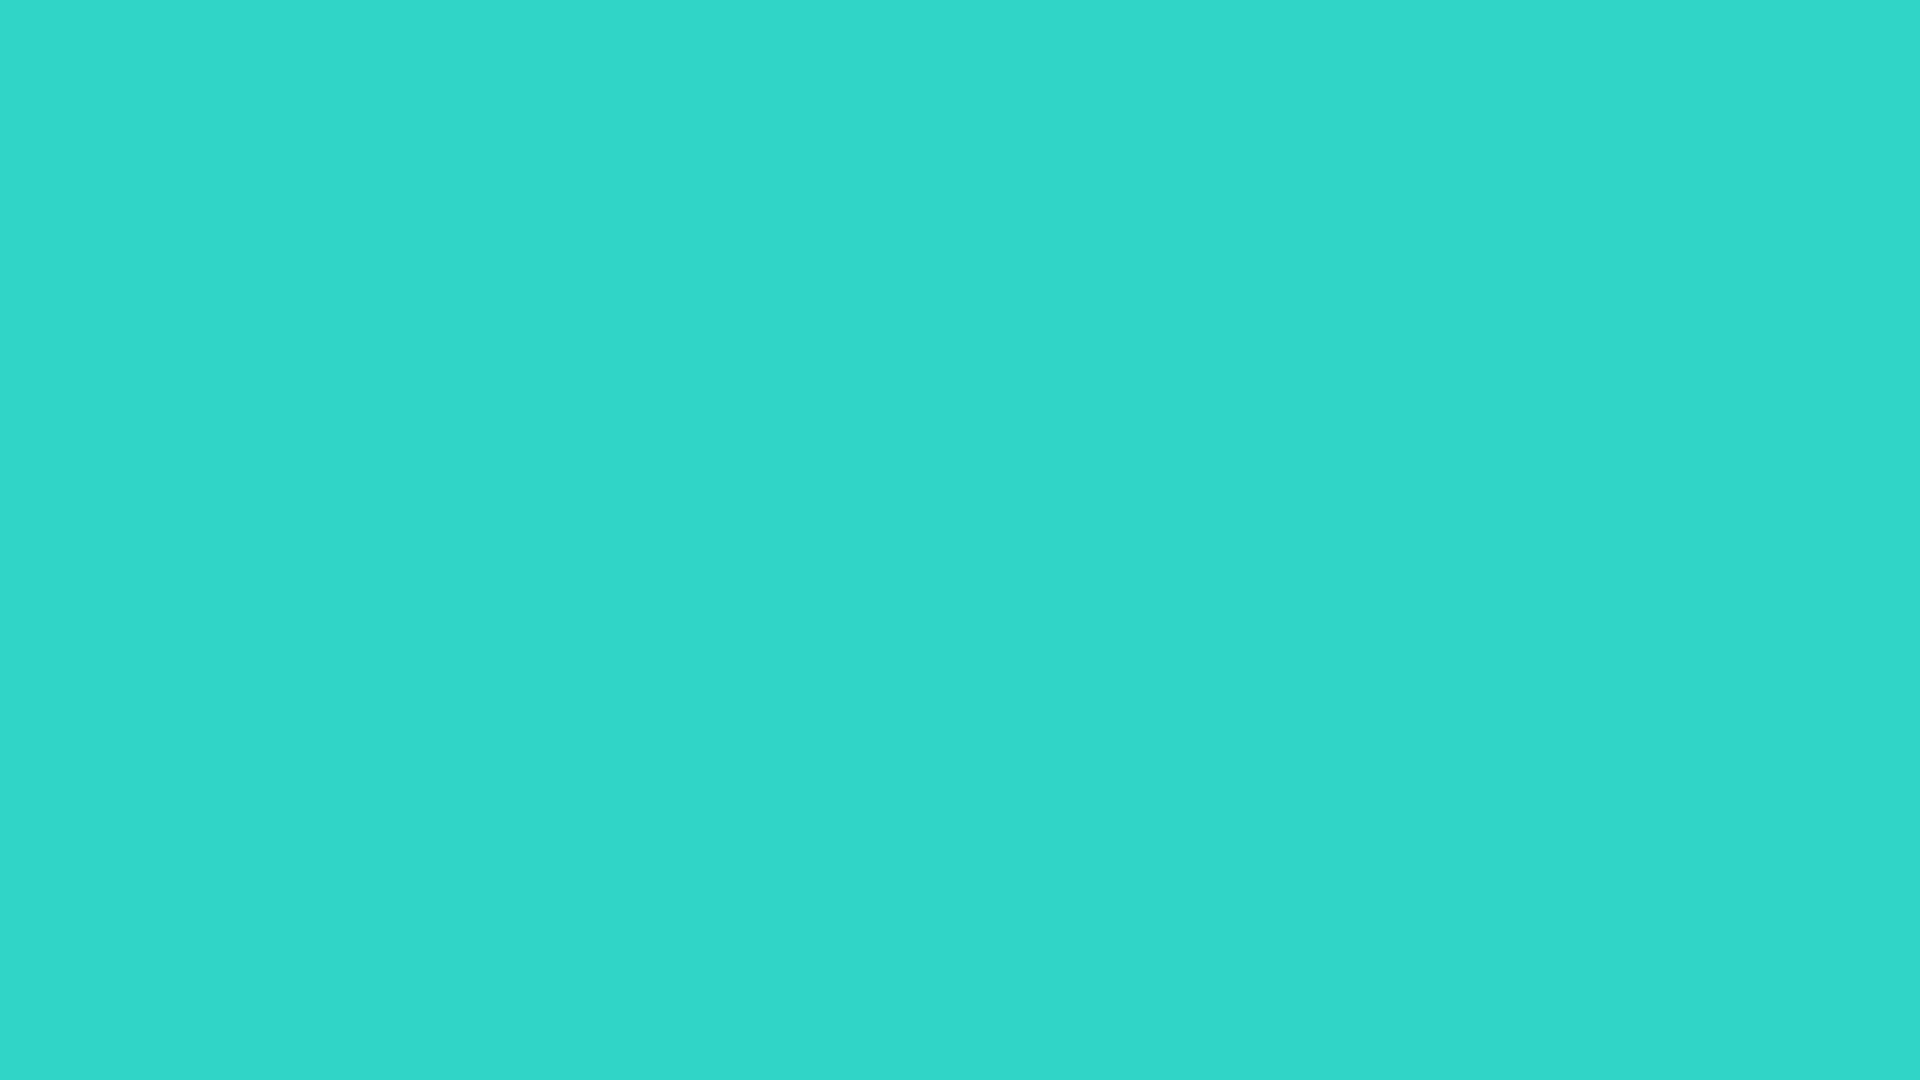 Teal Images | Free Photos, PNG Stickers, Wallpapers & Backgrounds - rawpixel